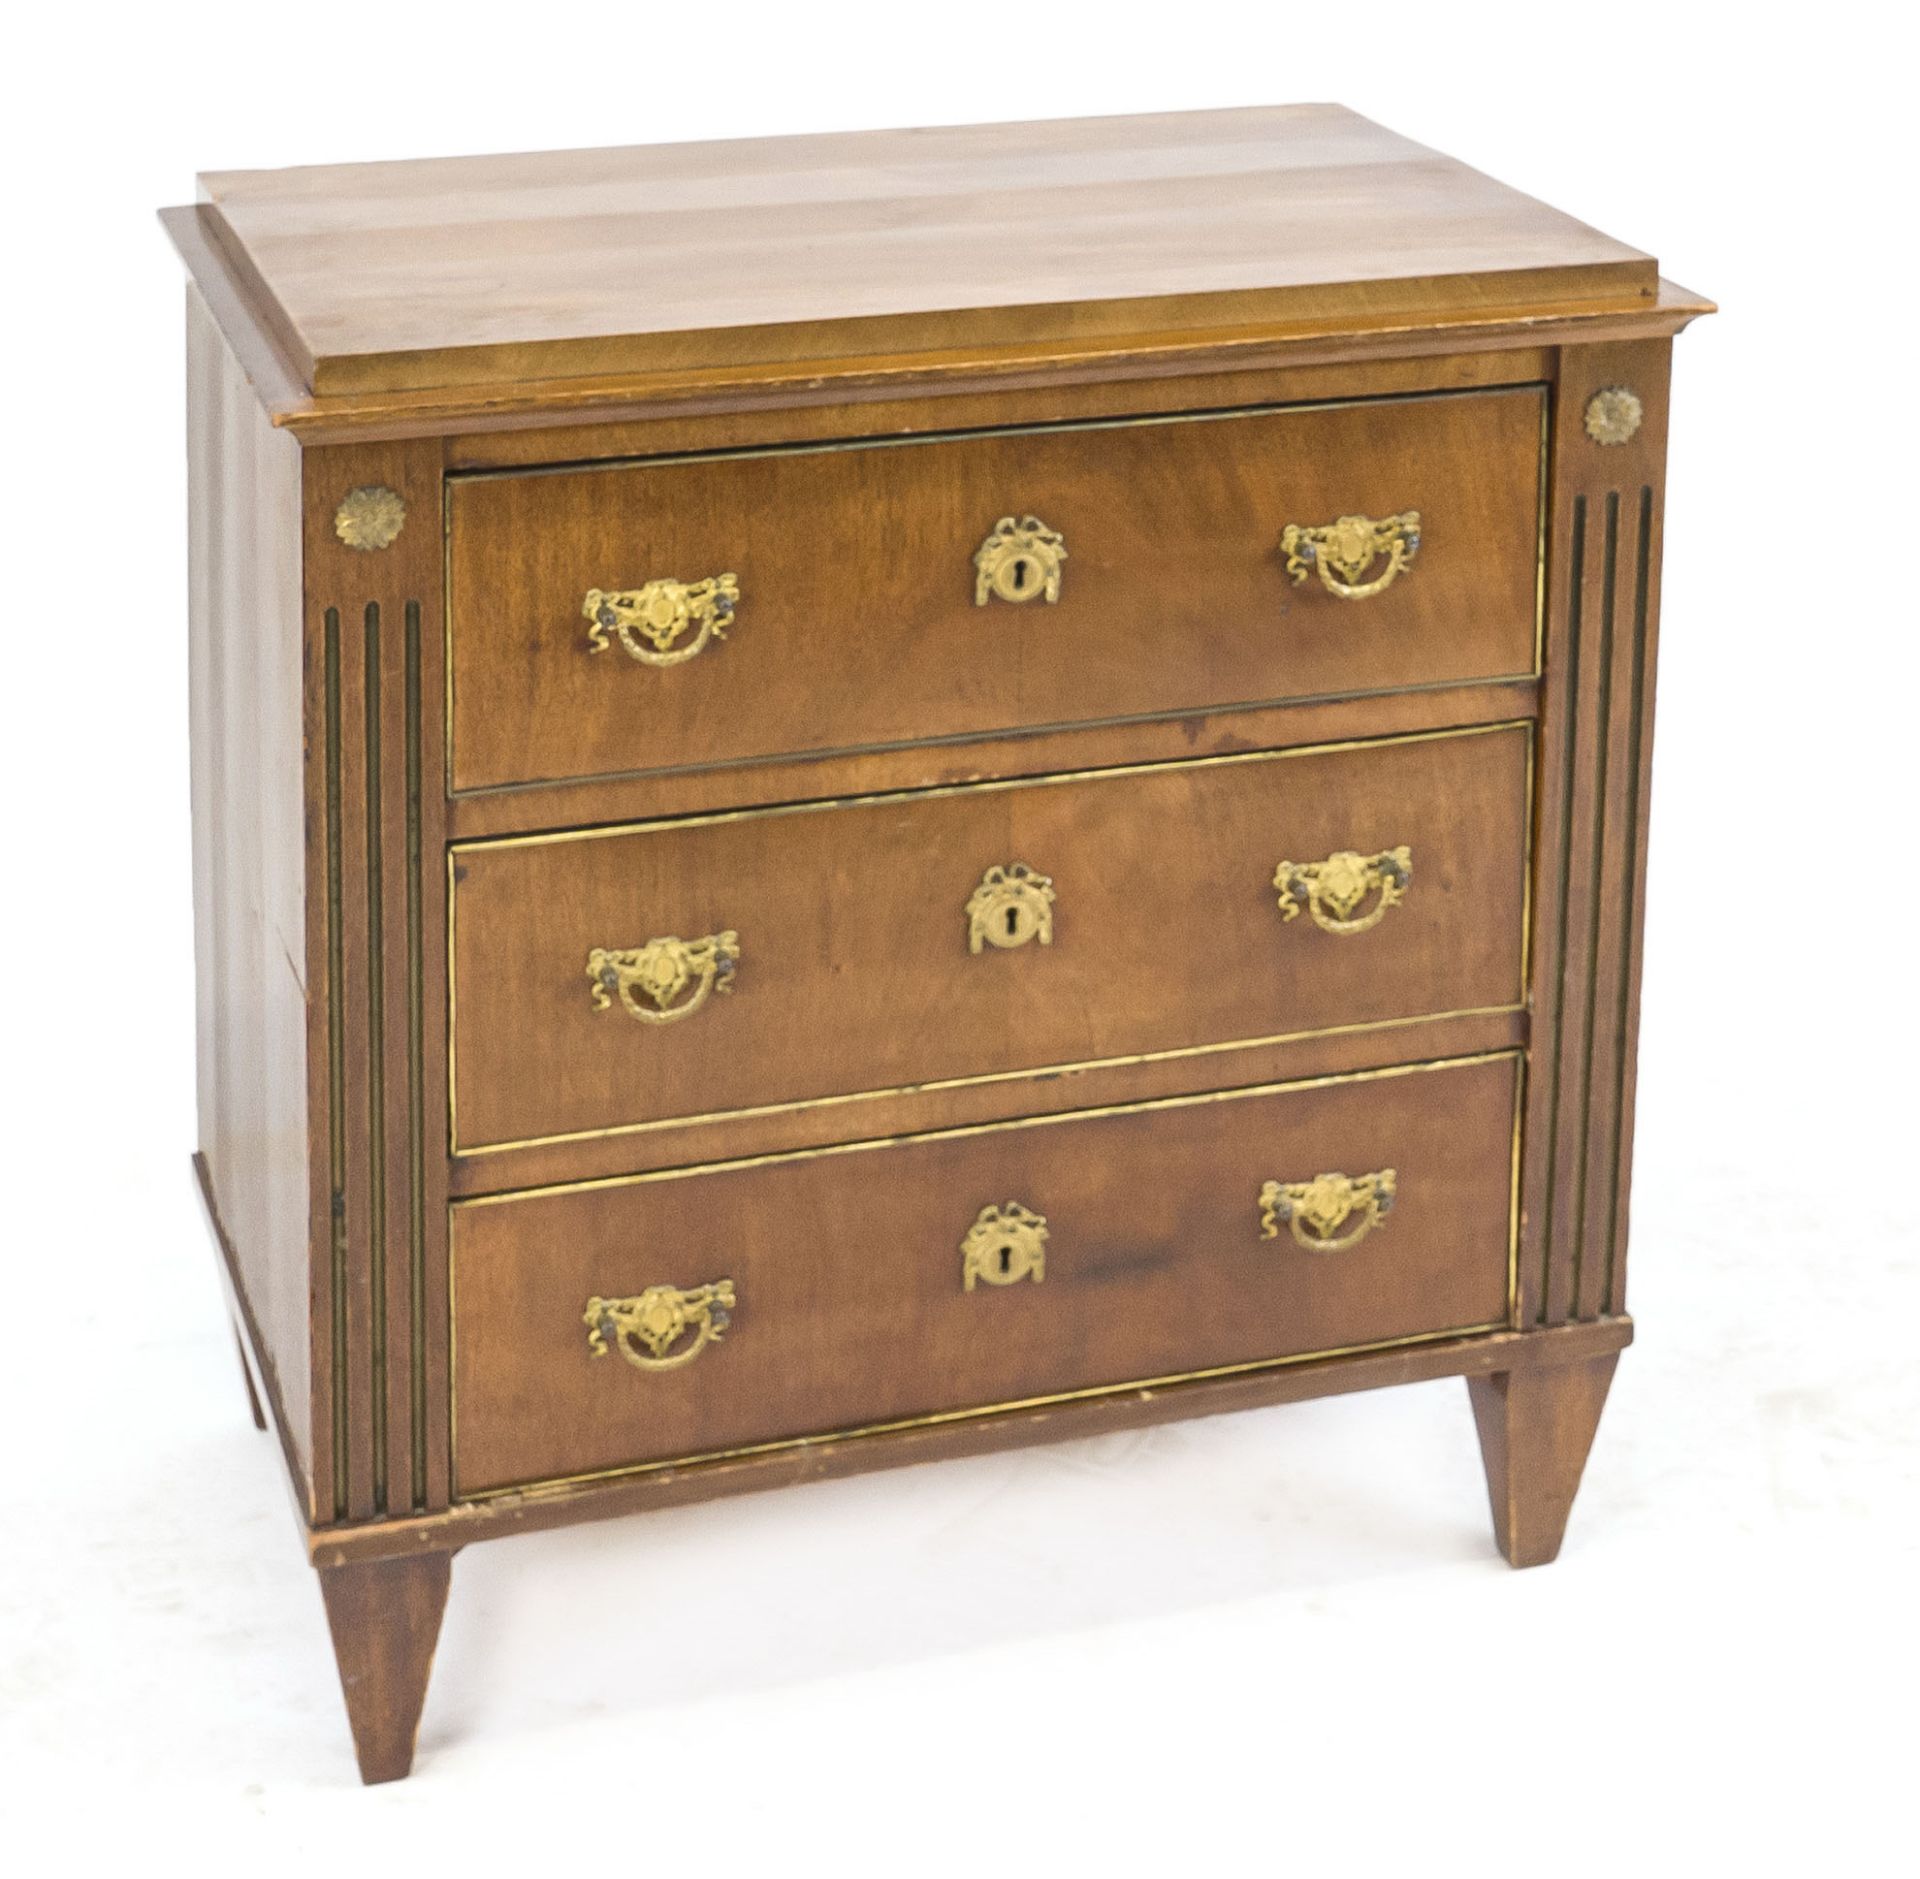 Classicist-style chest of drawers, c. 1900, mahogany, body with three drawers with brass edging